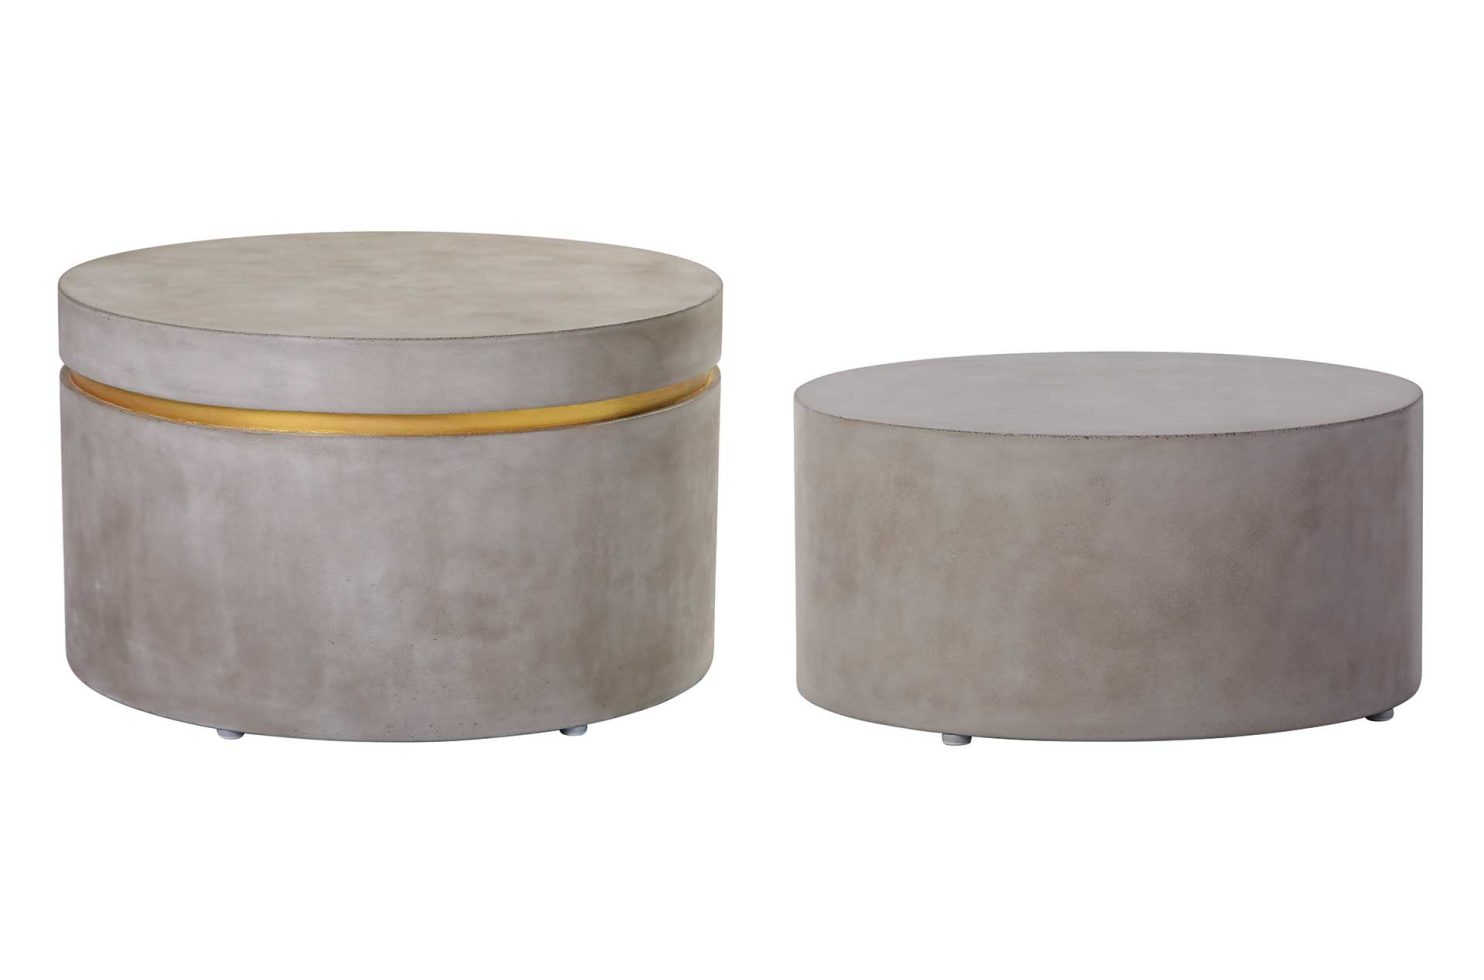 perp joy serendipity ring accent table P50199231117 gray gold 1 set web